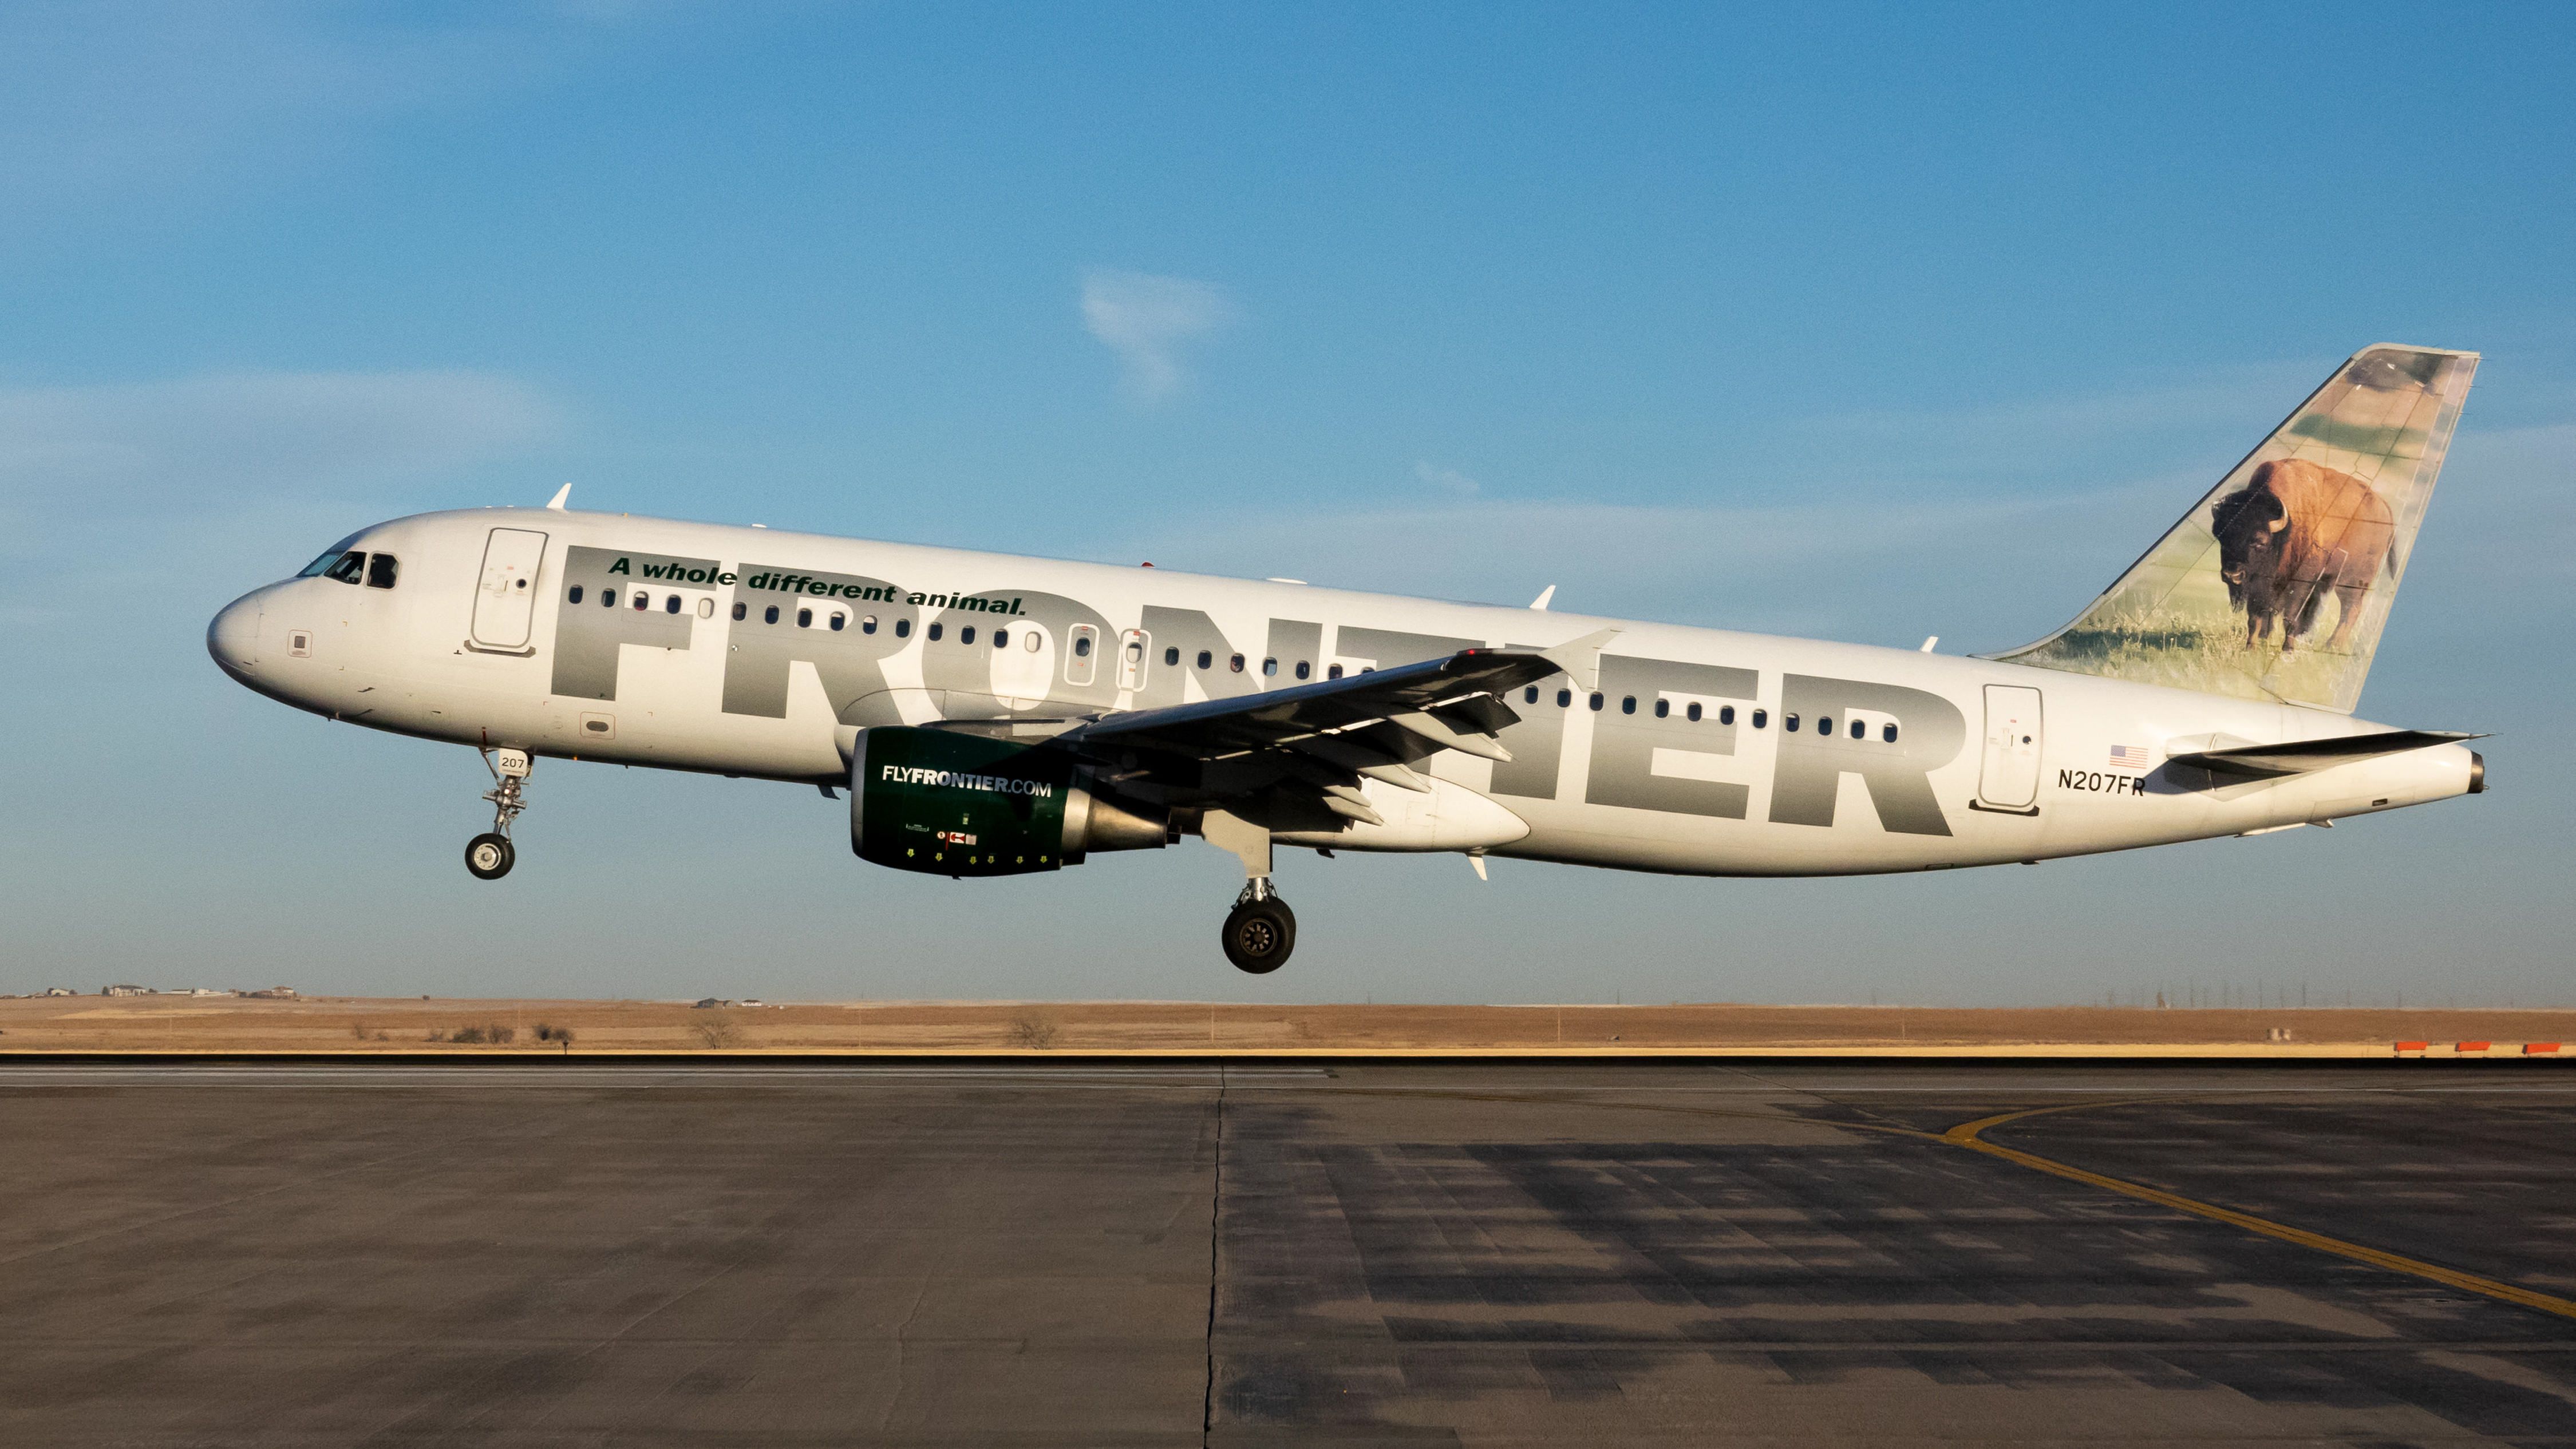 A Frontier Airlines plane at dusk